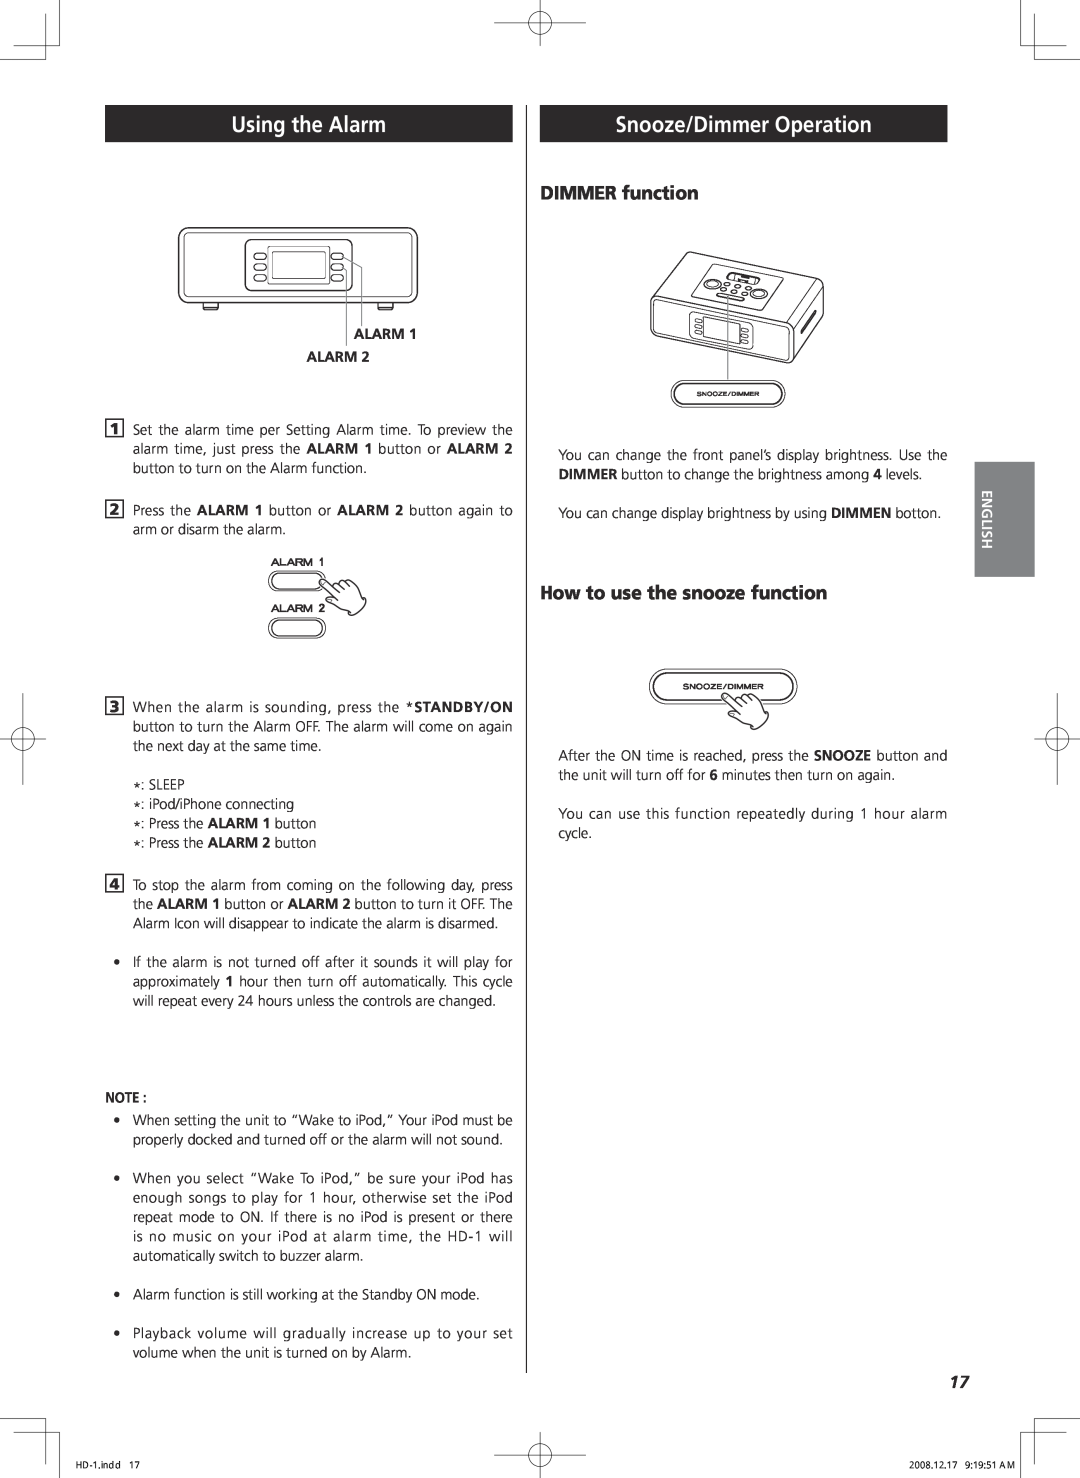 Teac HD-1 owner manual Using the Alarm, Snooze/Dimmer Operation, DIMMER function, How to use the snooze function 